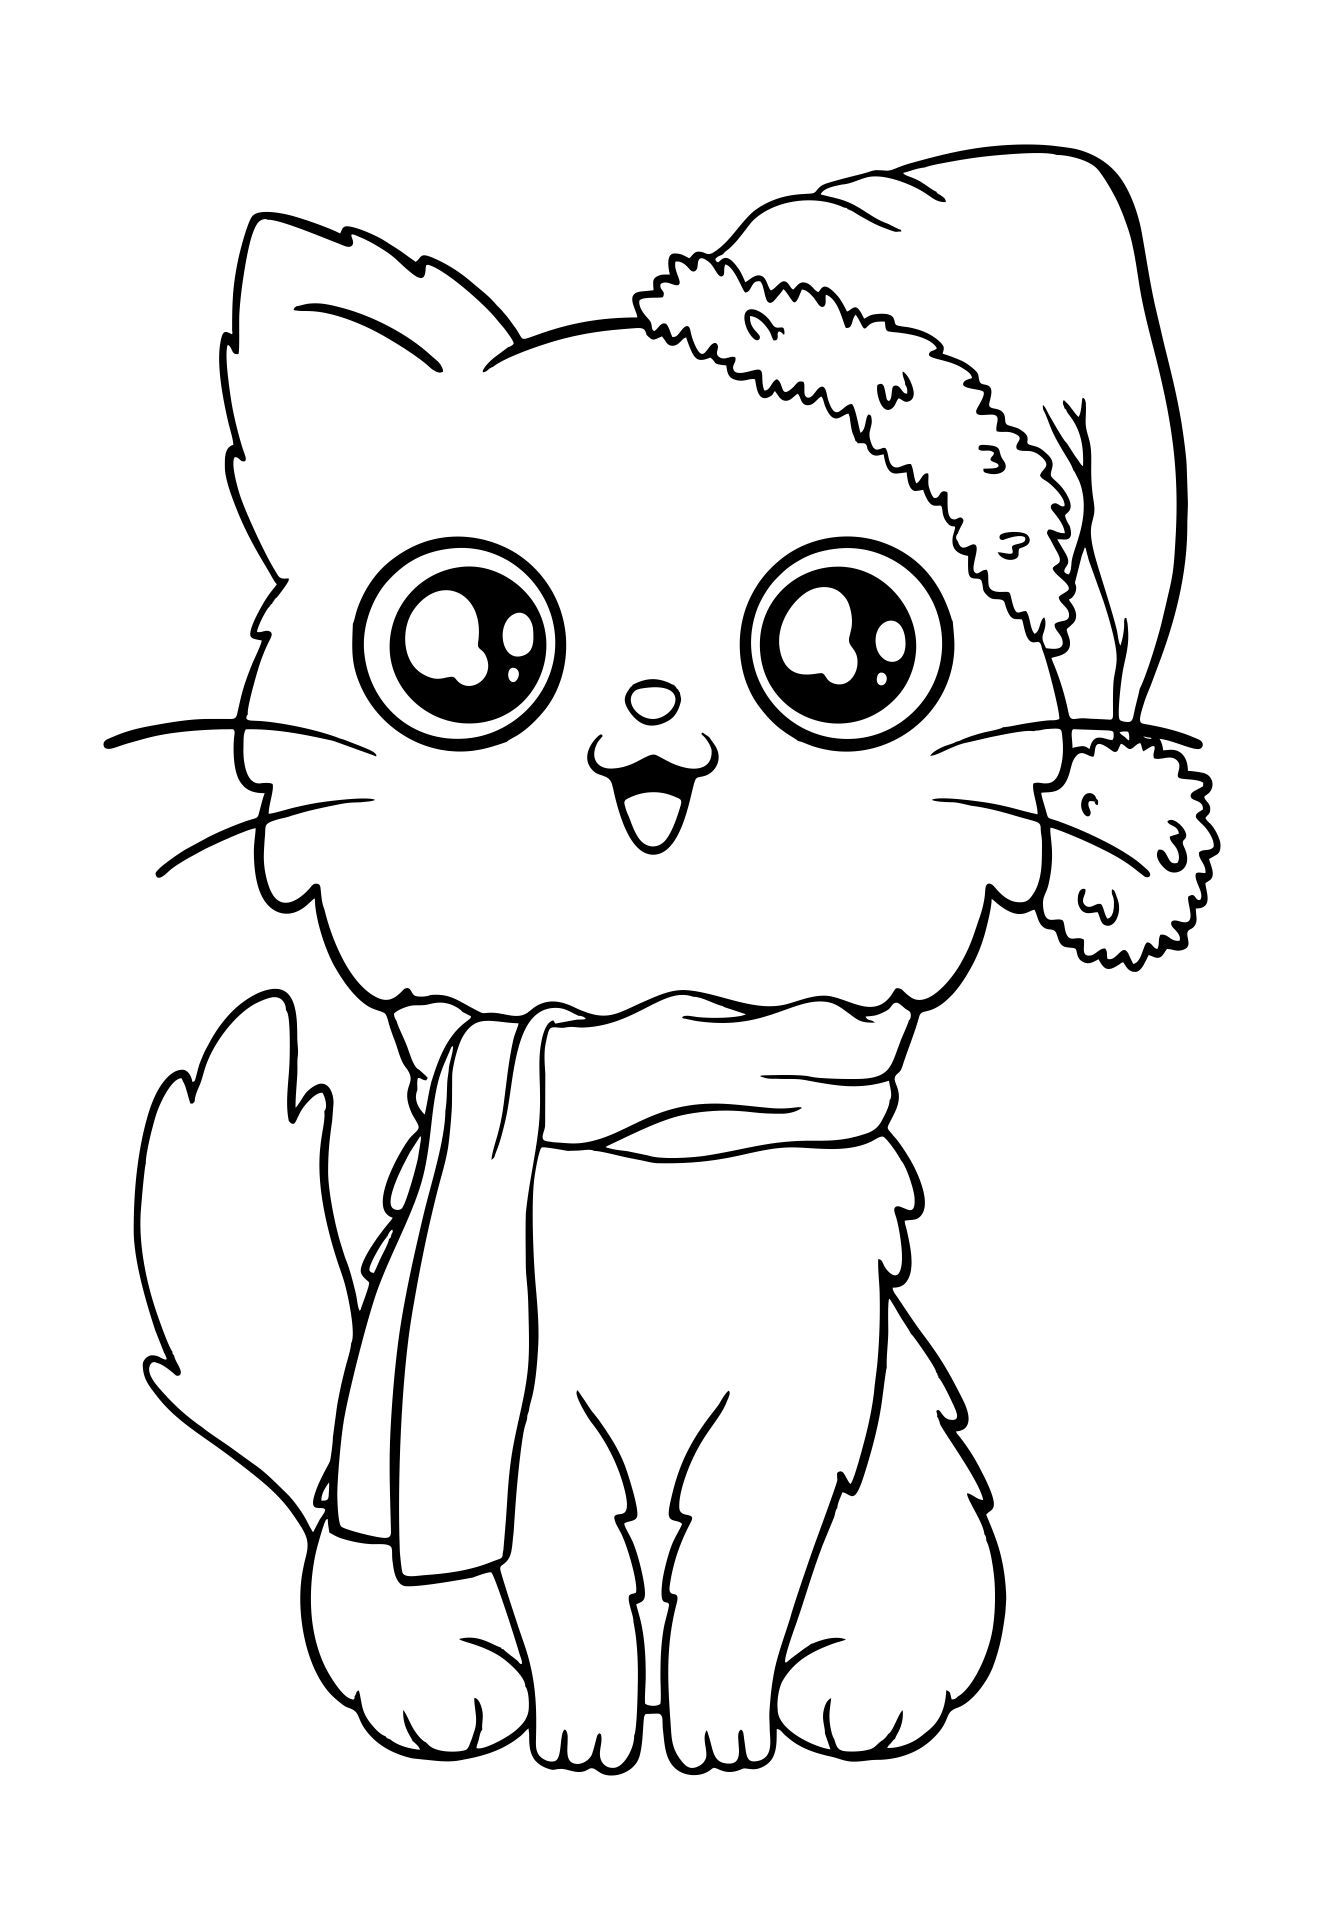 Printable simple christmas kitten coloring pages kitty coloring christmas coloring sheets cat coloring page